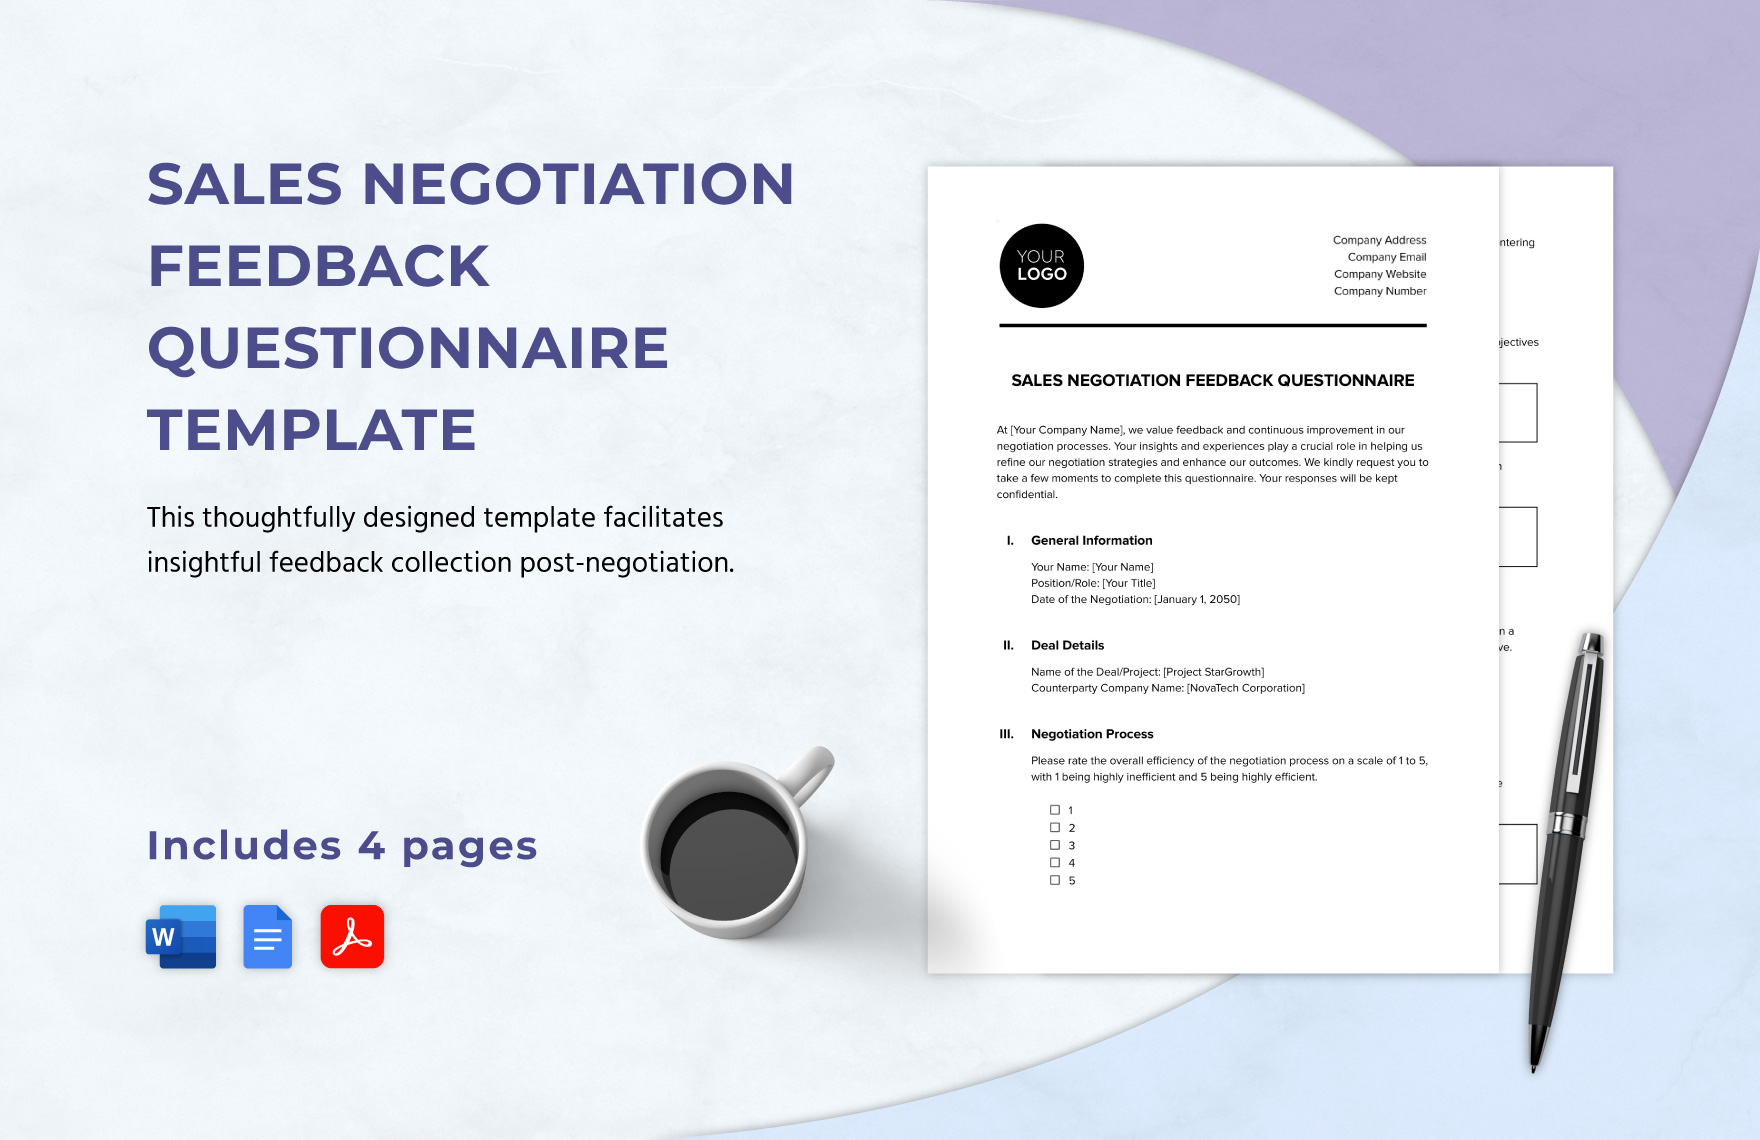 Sales Negotiation Feedback Questionnaire Template in Word, Google Docs, PDF